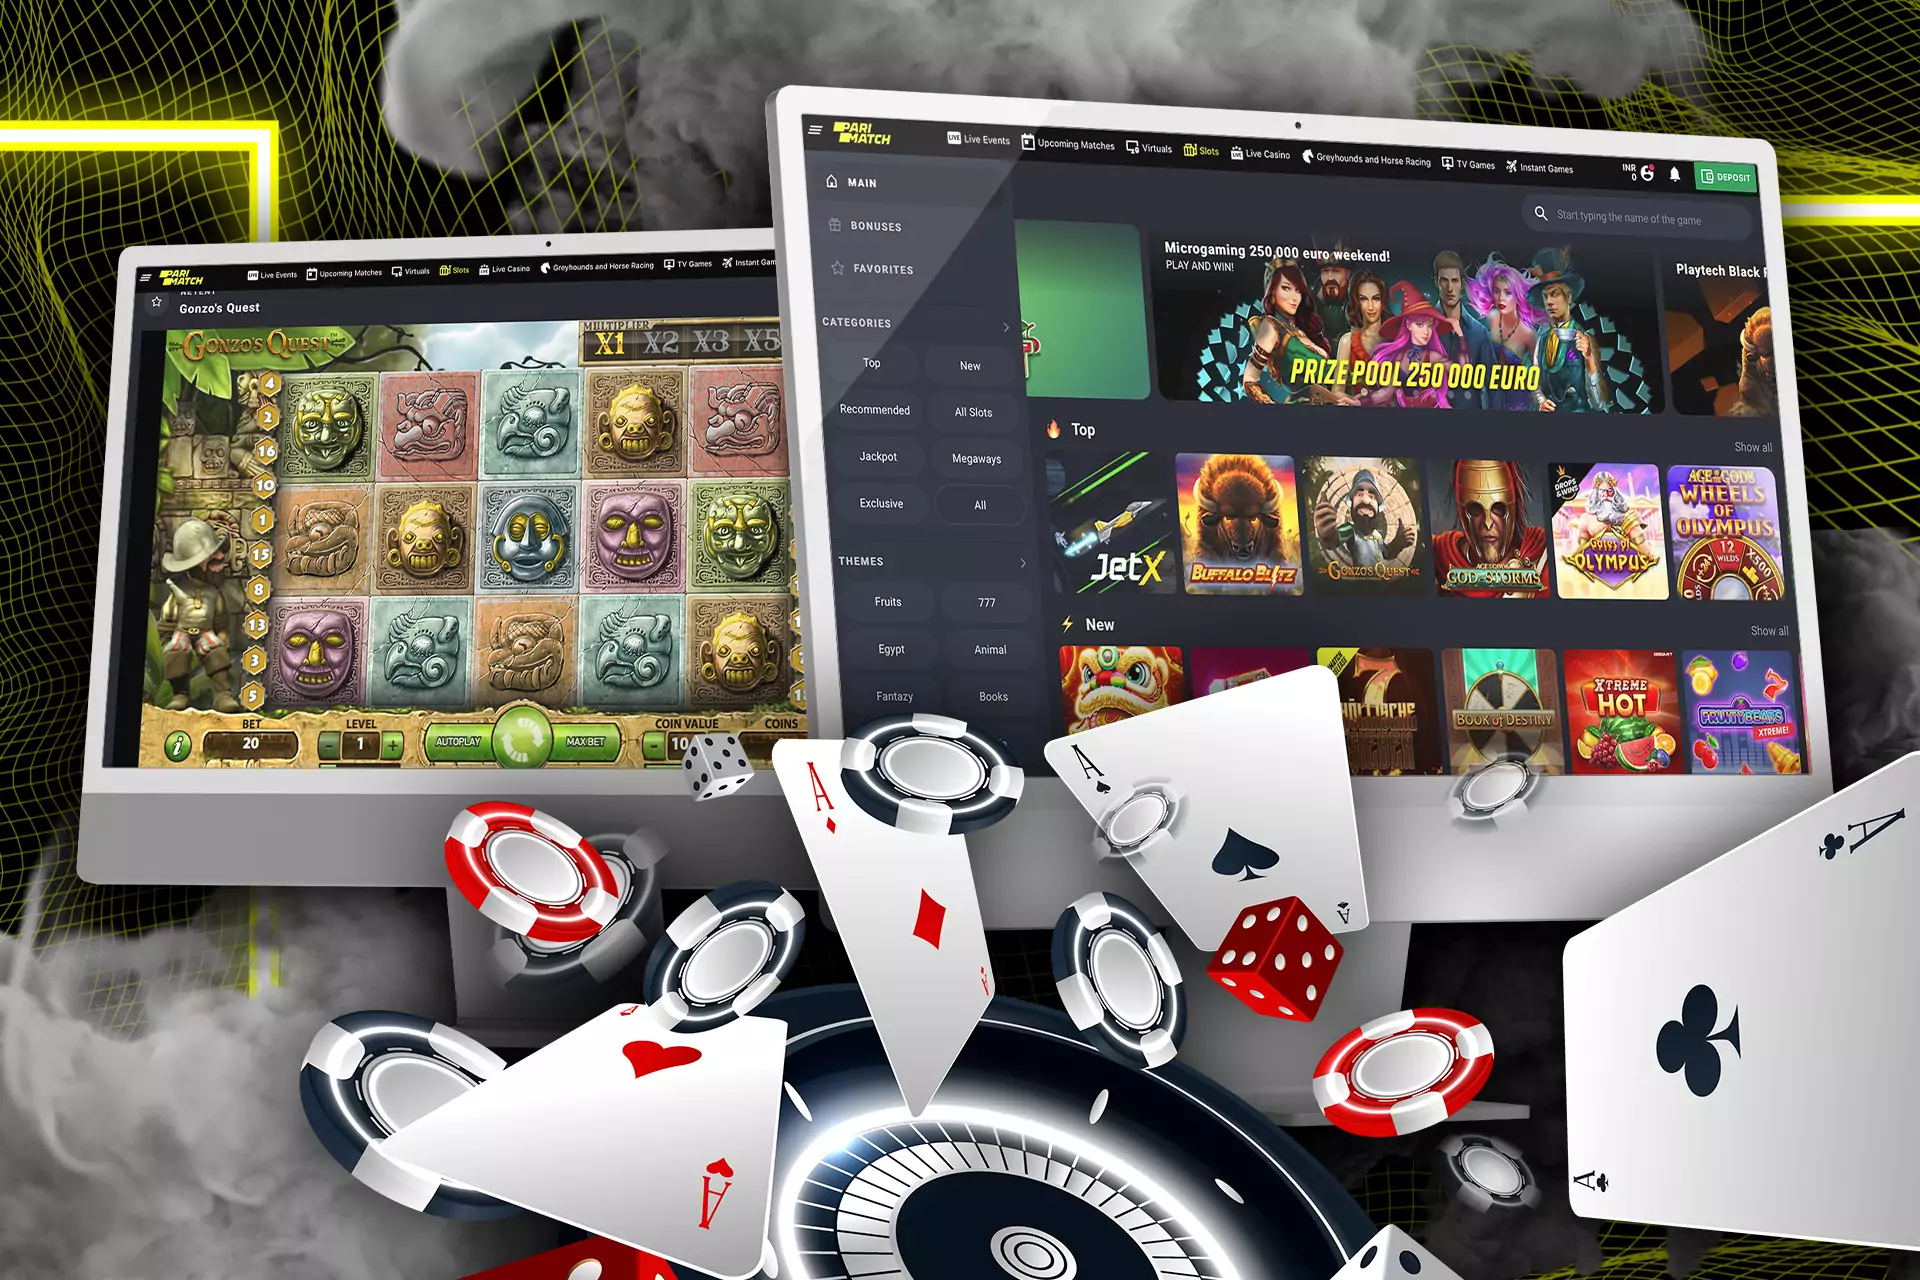 In the section of games, there are slots and traditional worldwide and Indian card games.